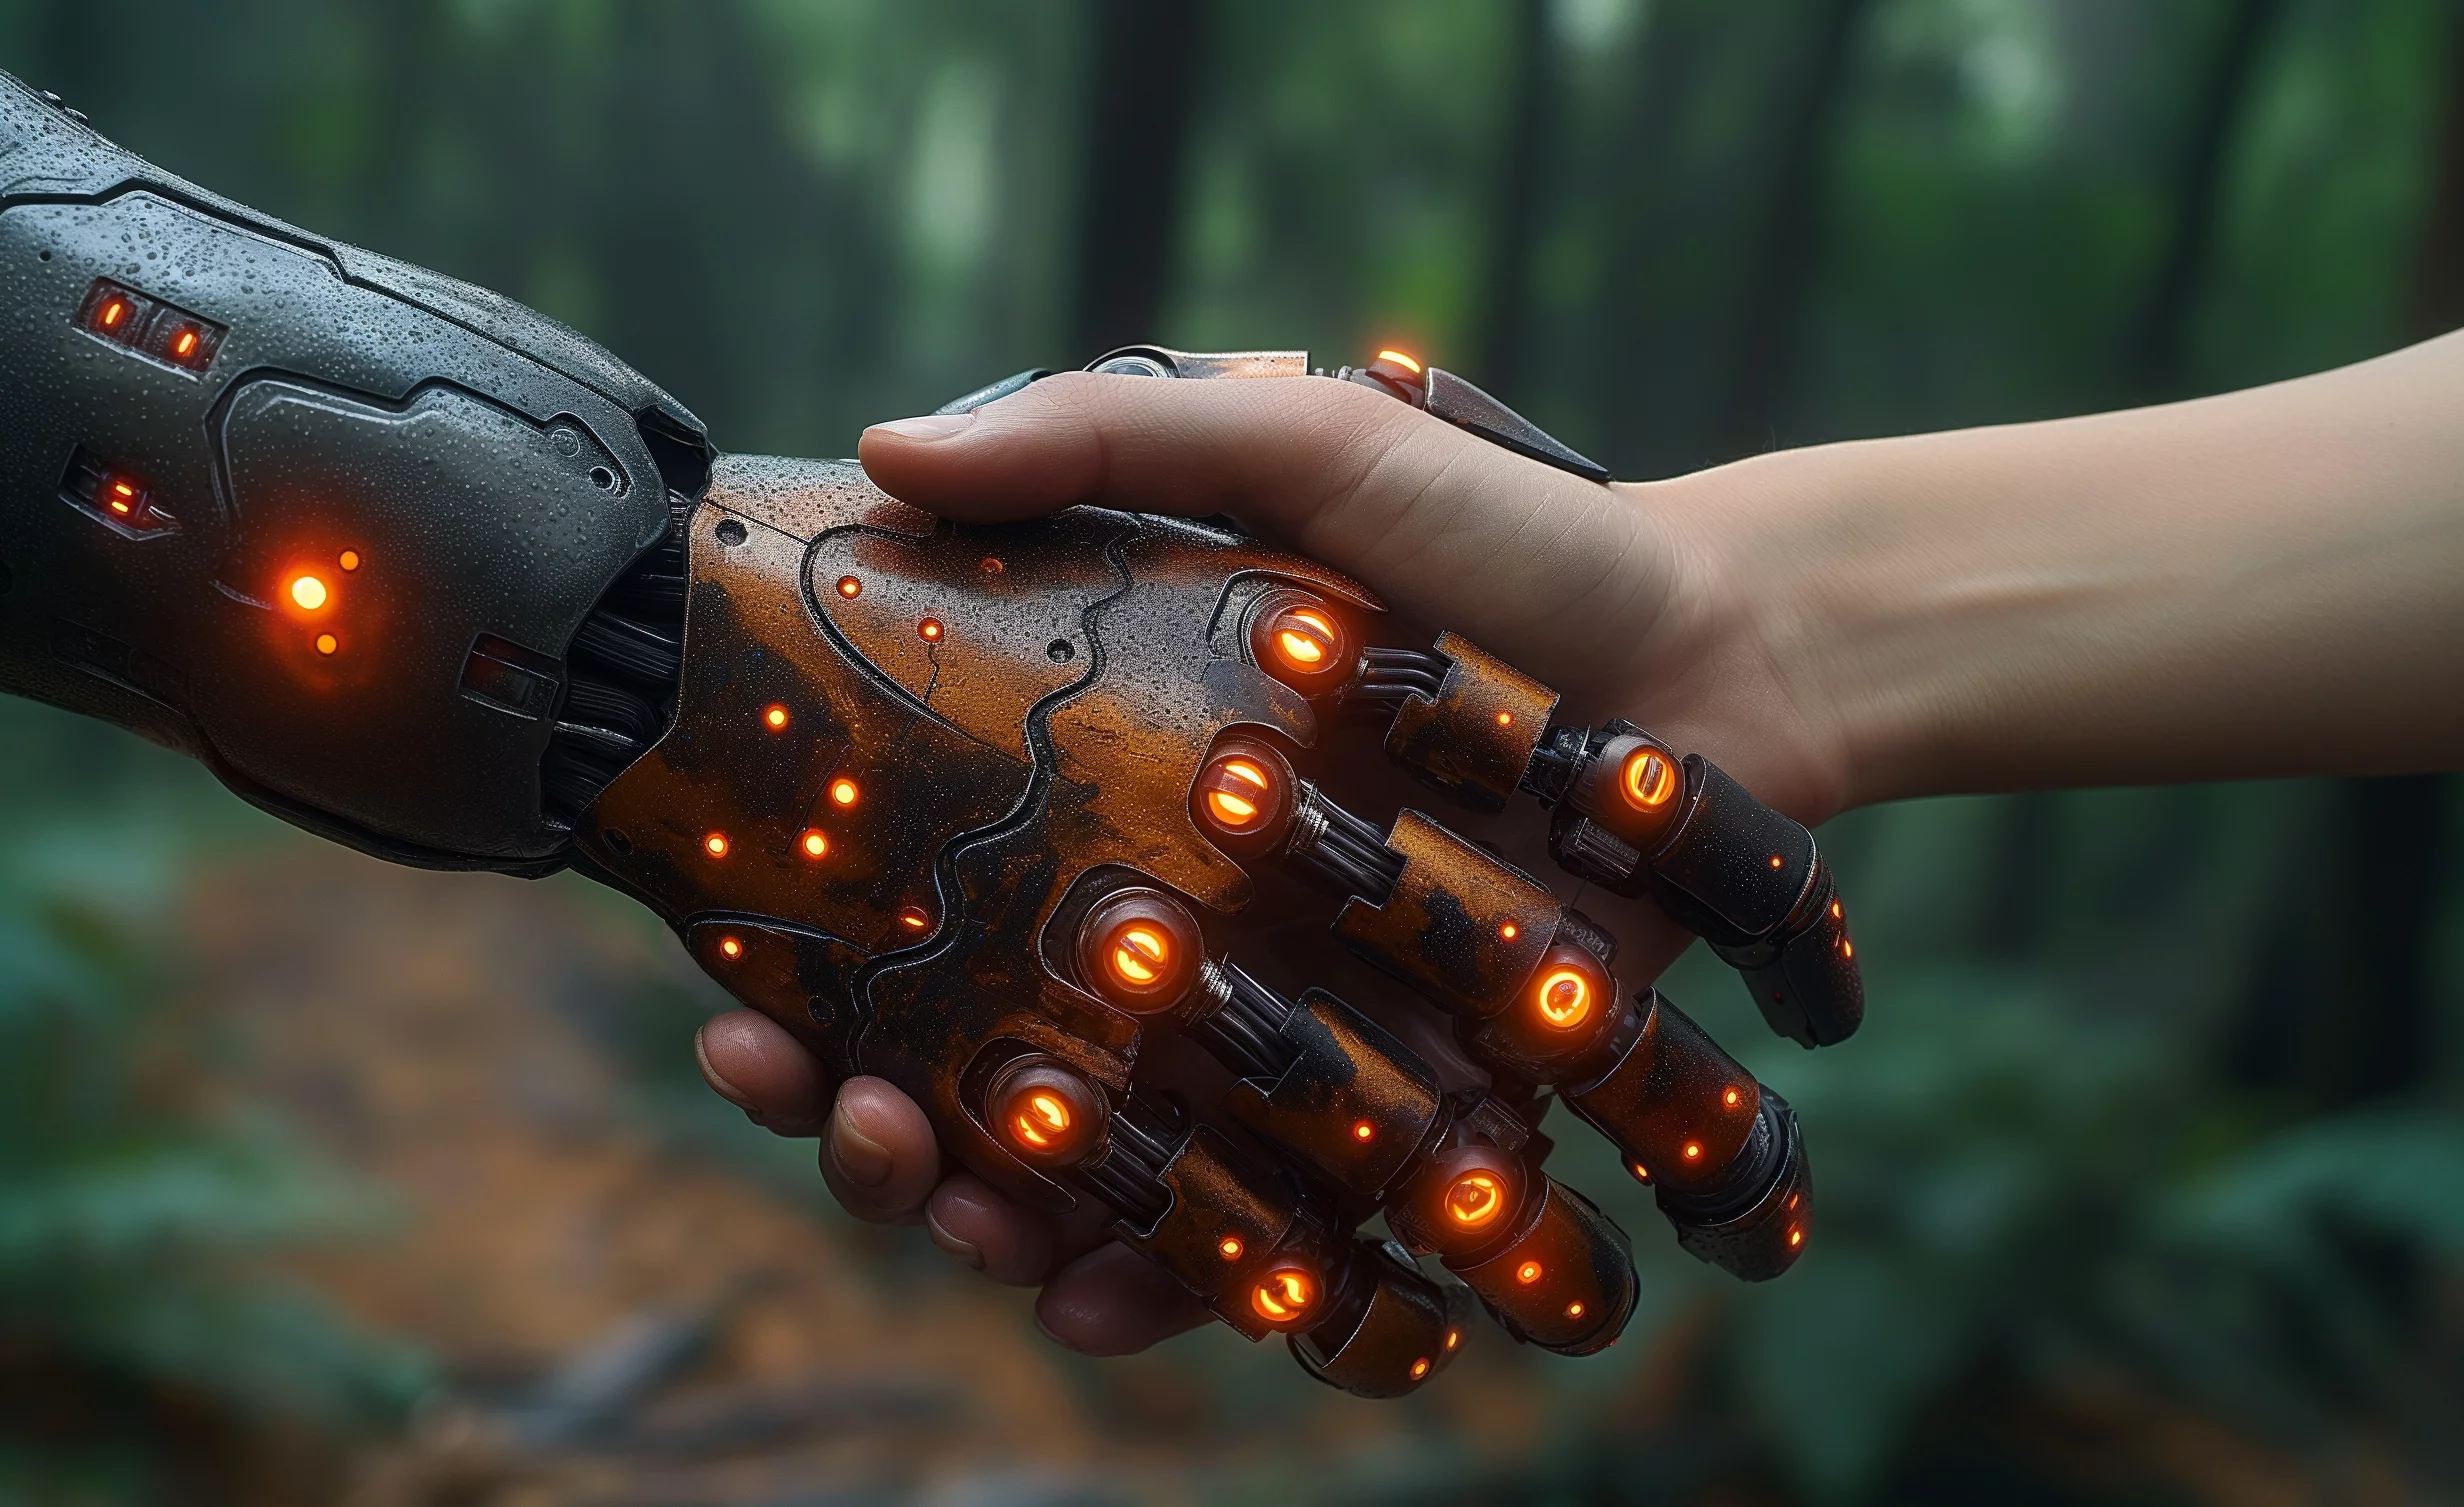 Shaking hands with a Bionic arm